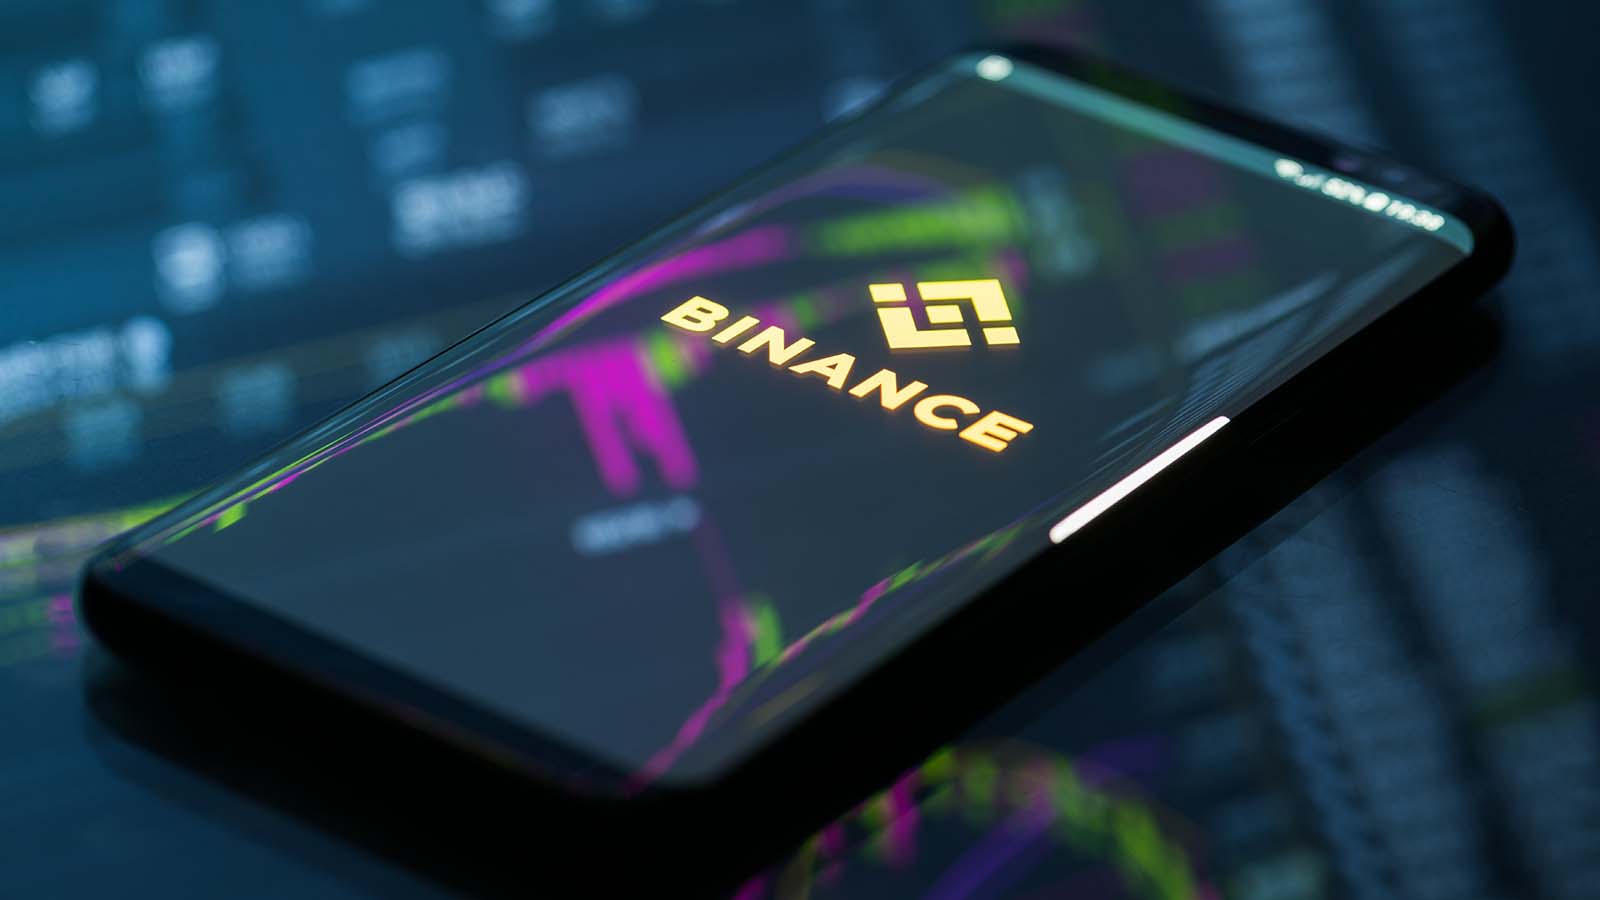 The Binance logo on a smartphone with a neon chart in the background.